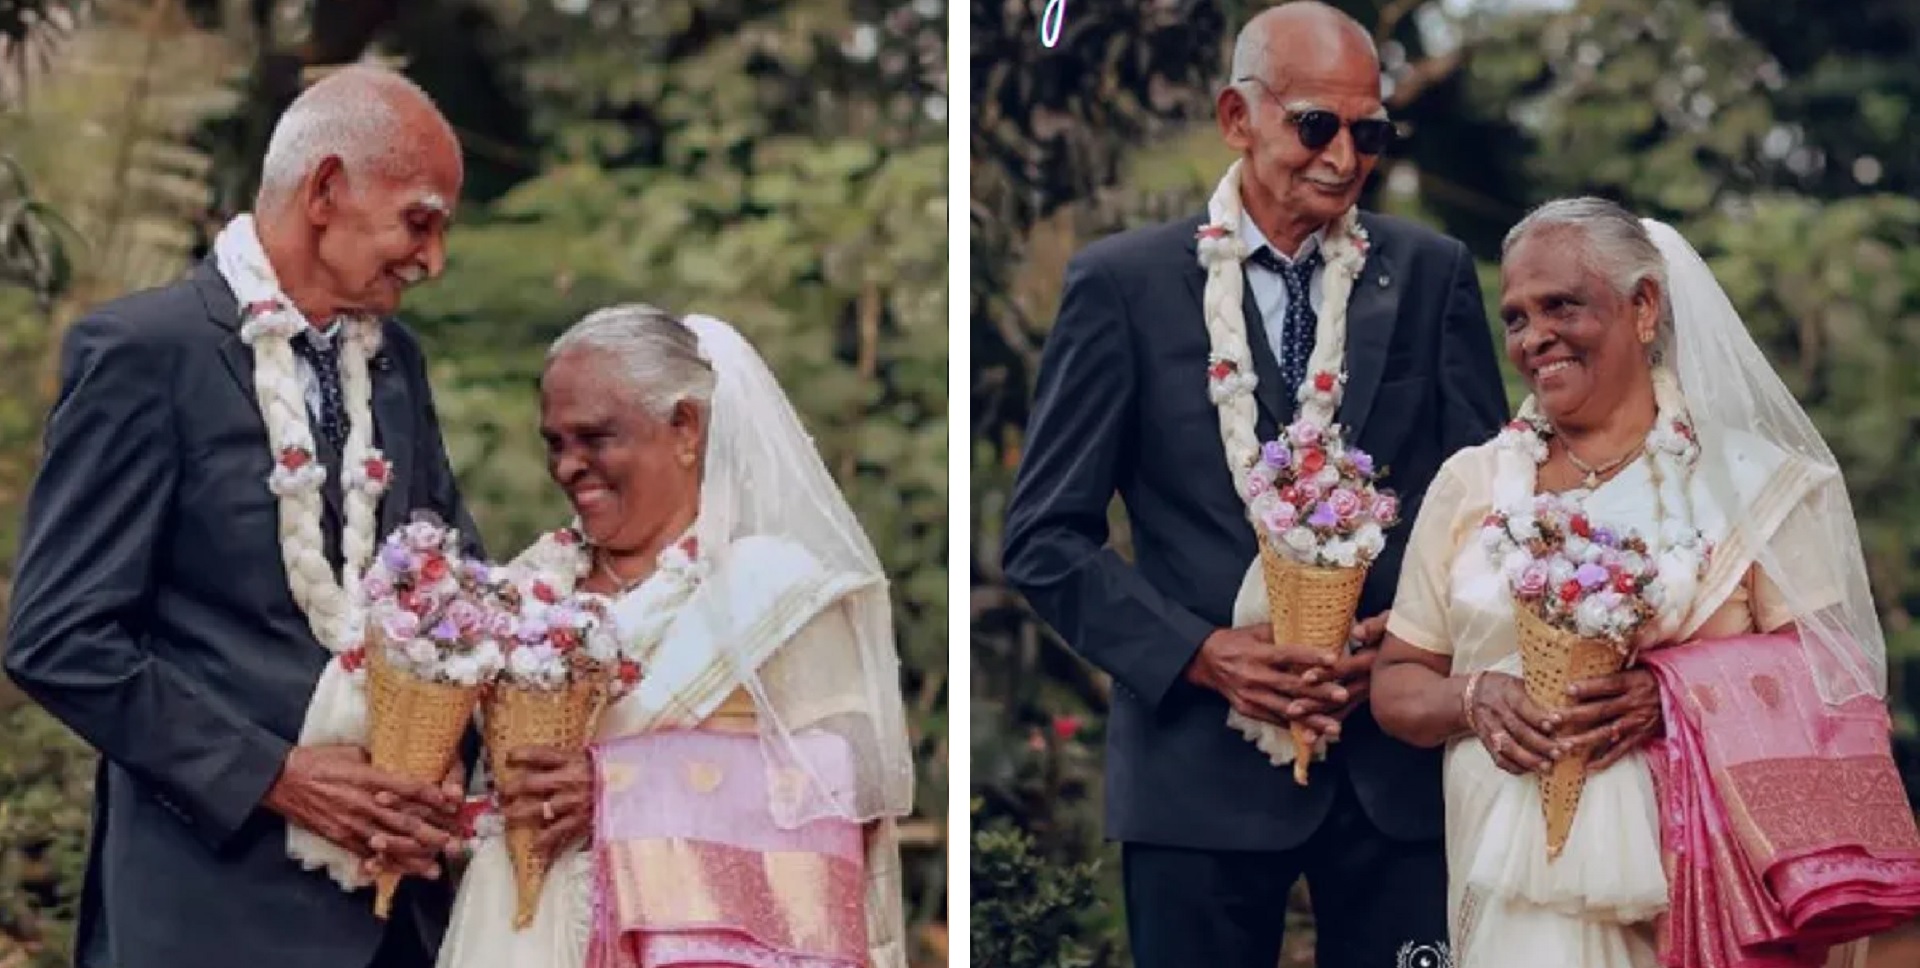 Kerala Couple Does First Wedding Photoshoot 58 Years After Their Marriage!